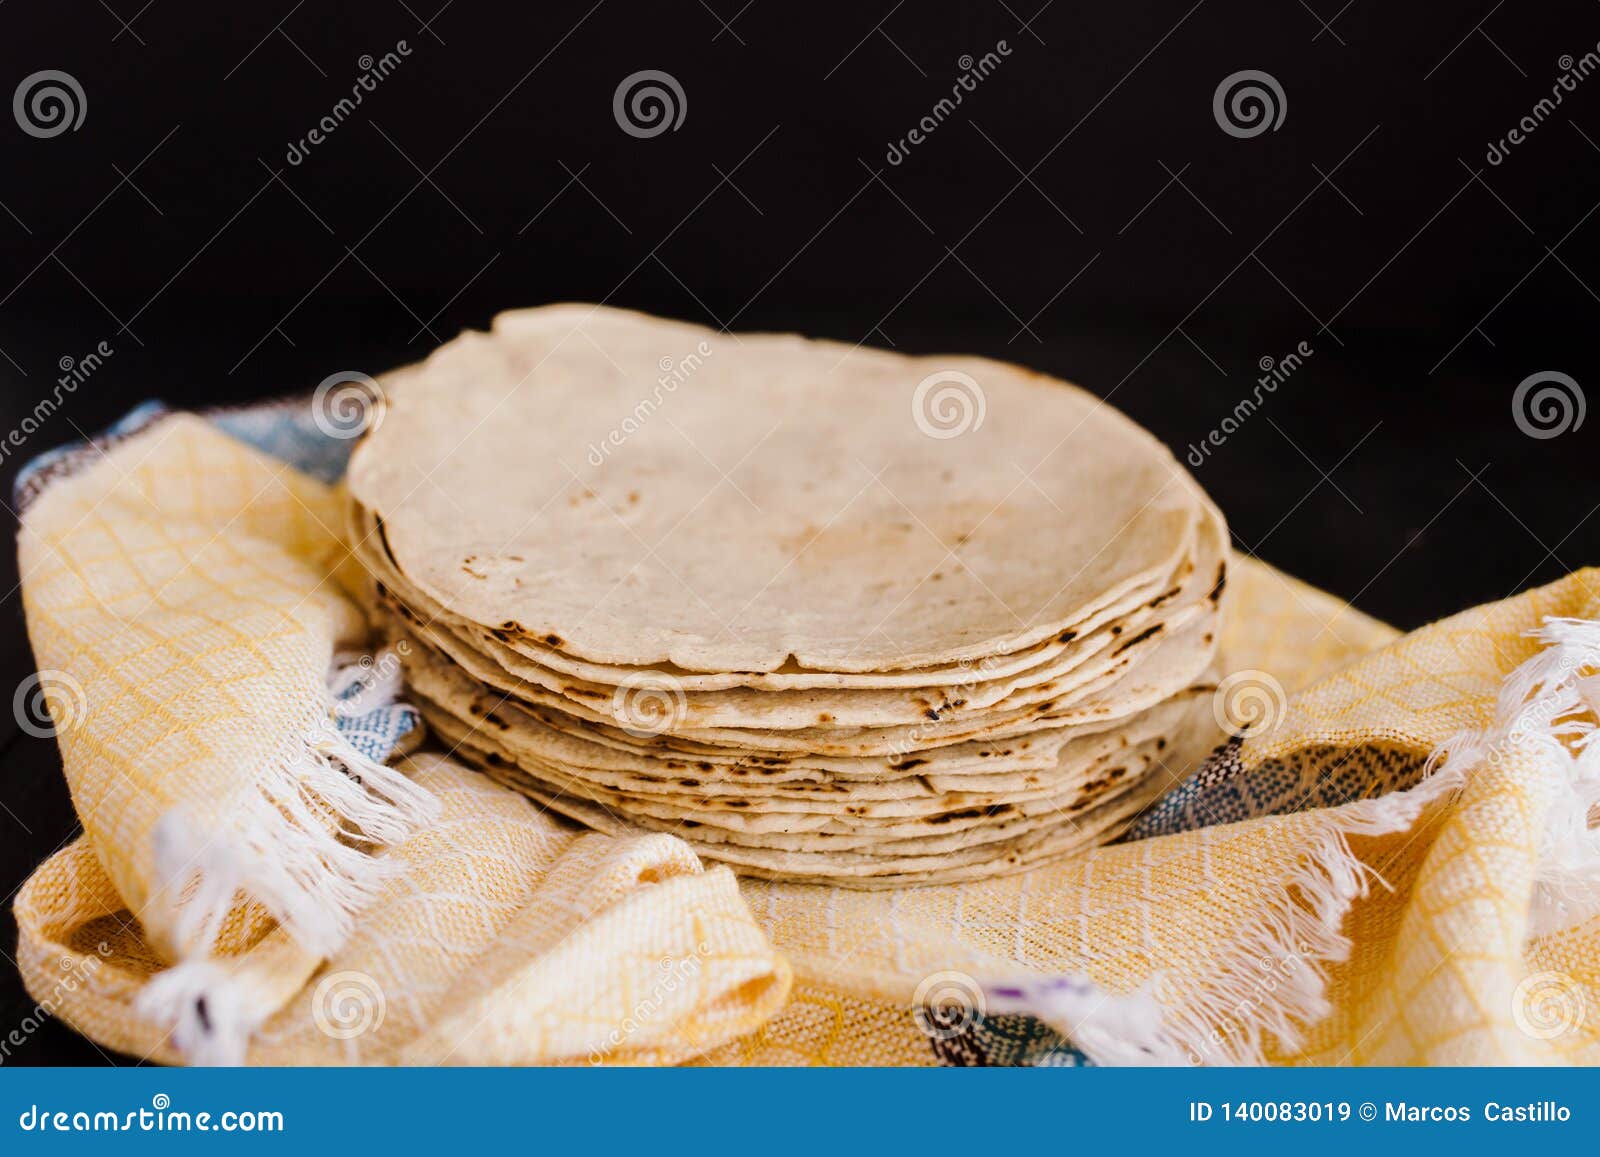 tortillas mexicanas, corn made mexican food traditional food in mexico